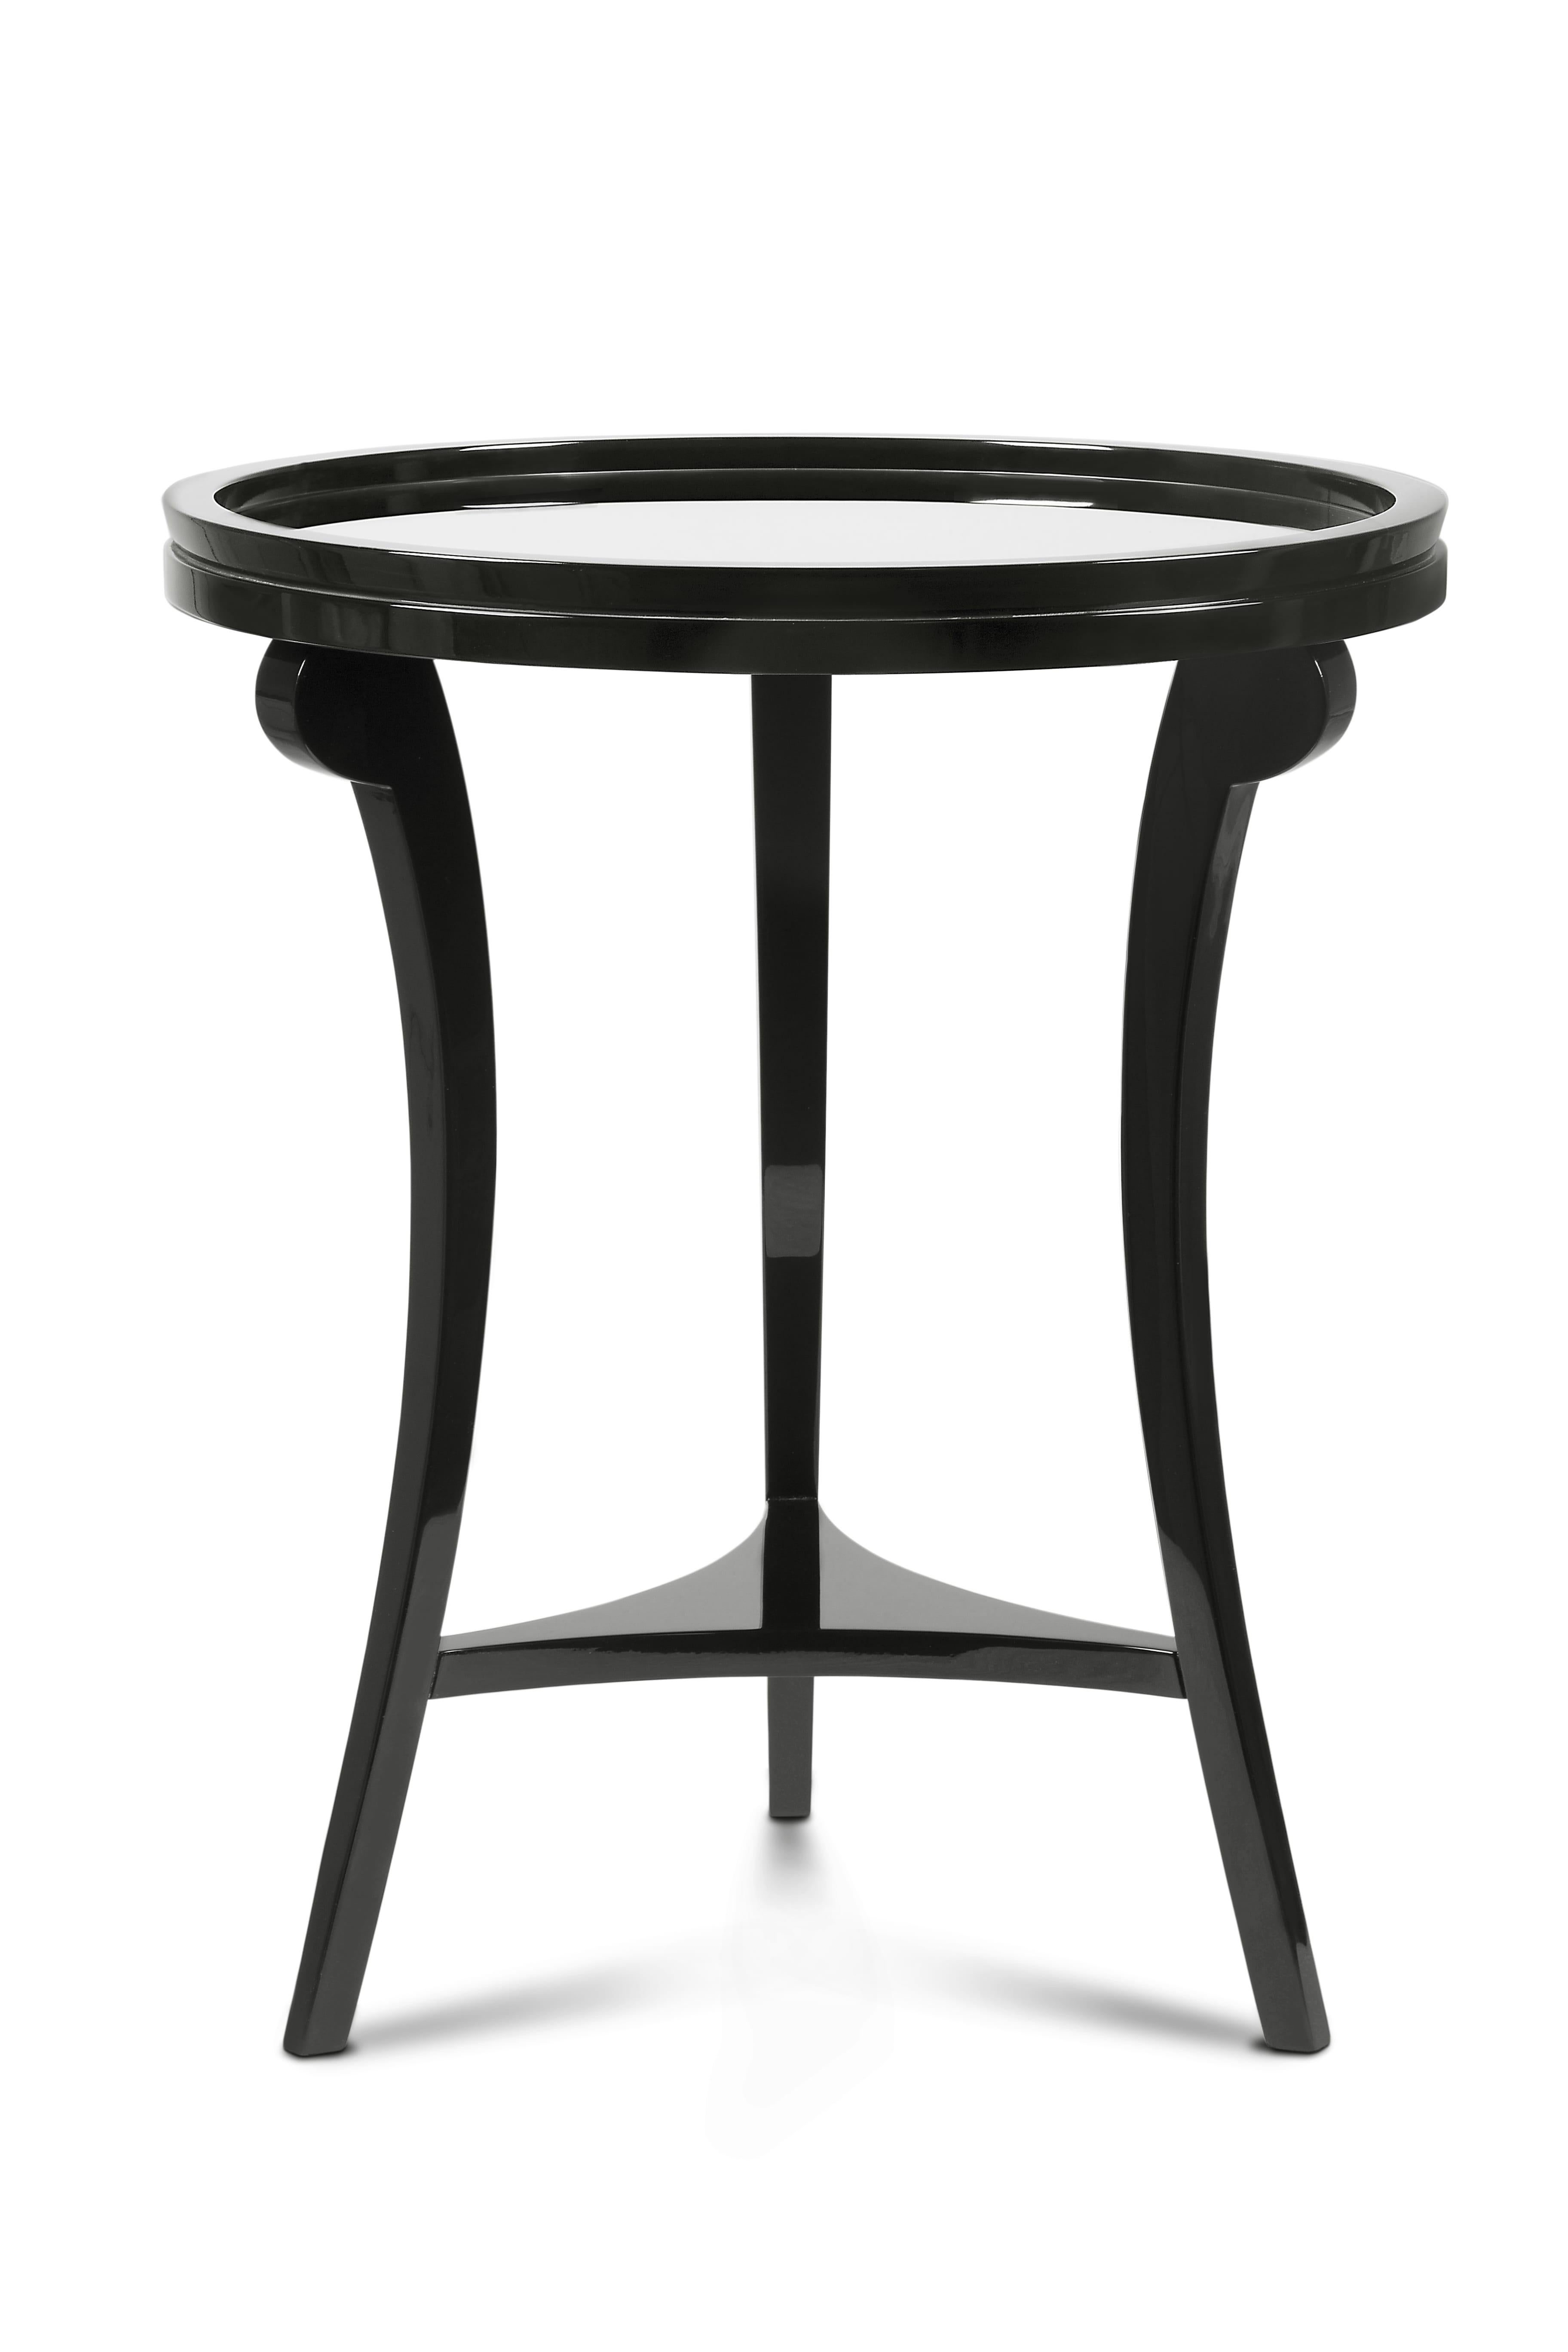 5th Avenue, in New York, inspired the name of this sophisticated décor piece. 5th table is a very elegant and stylish side table with a mirrored tabletop. This gorgeous side table will look perfect next to your favorite sofa. A round shaped top